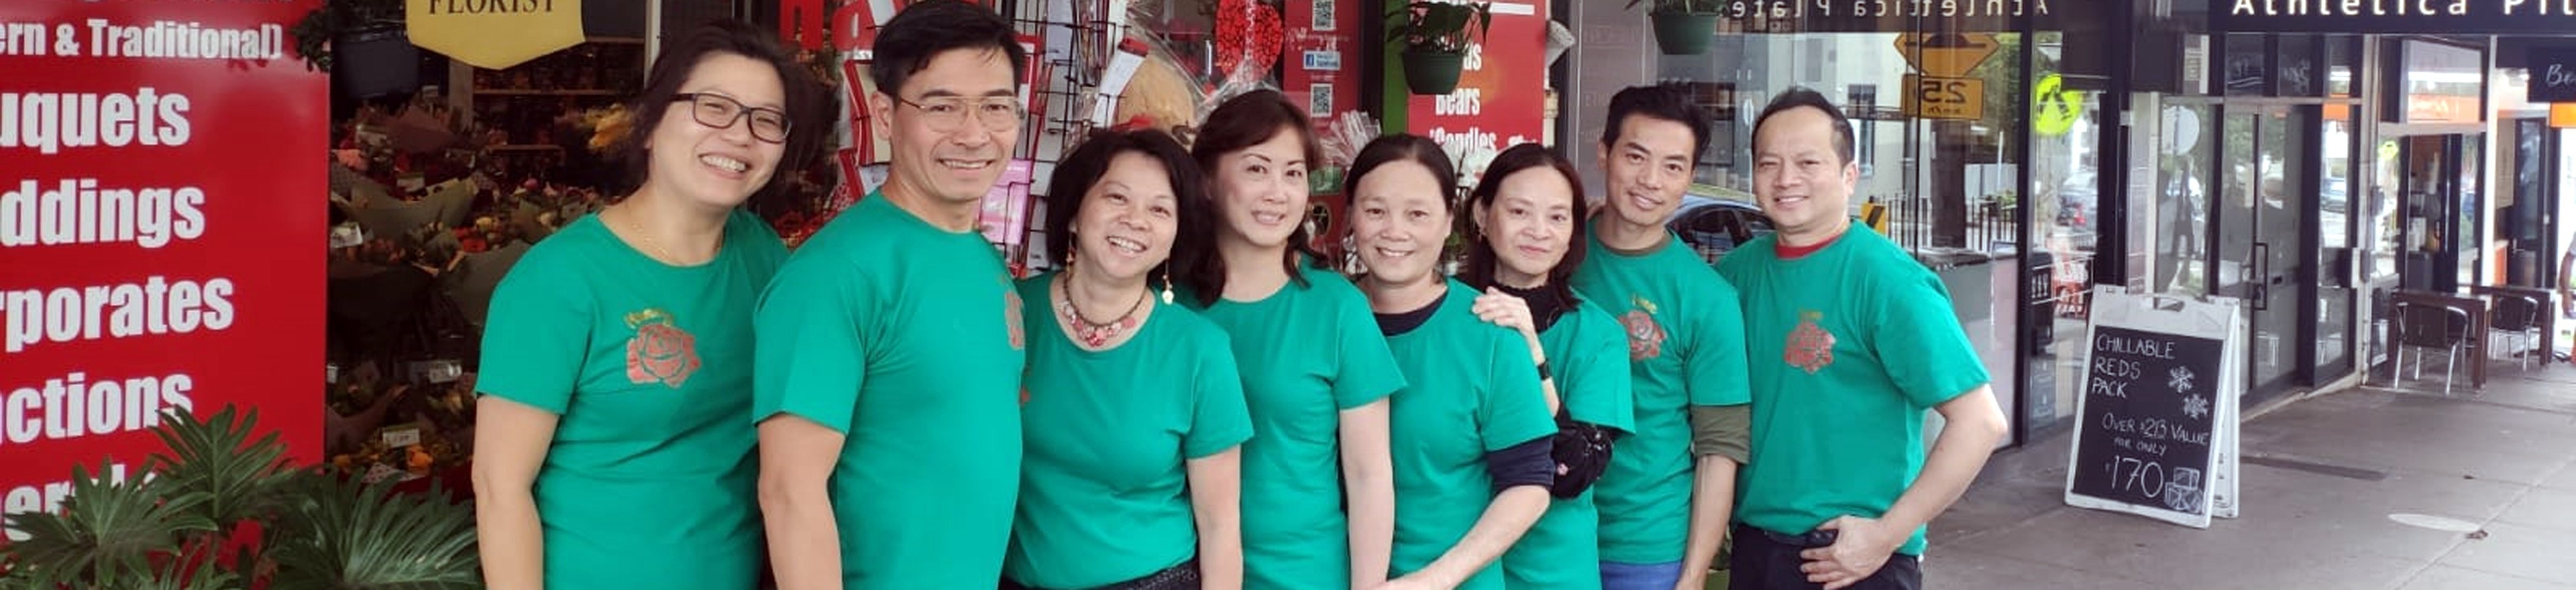 A group of people wearing green shirts standing in front of a store.